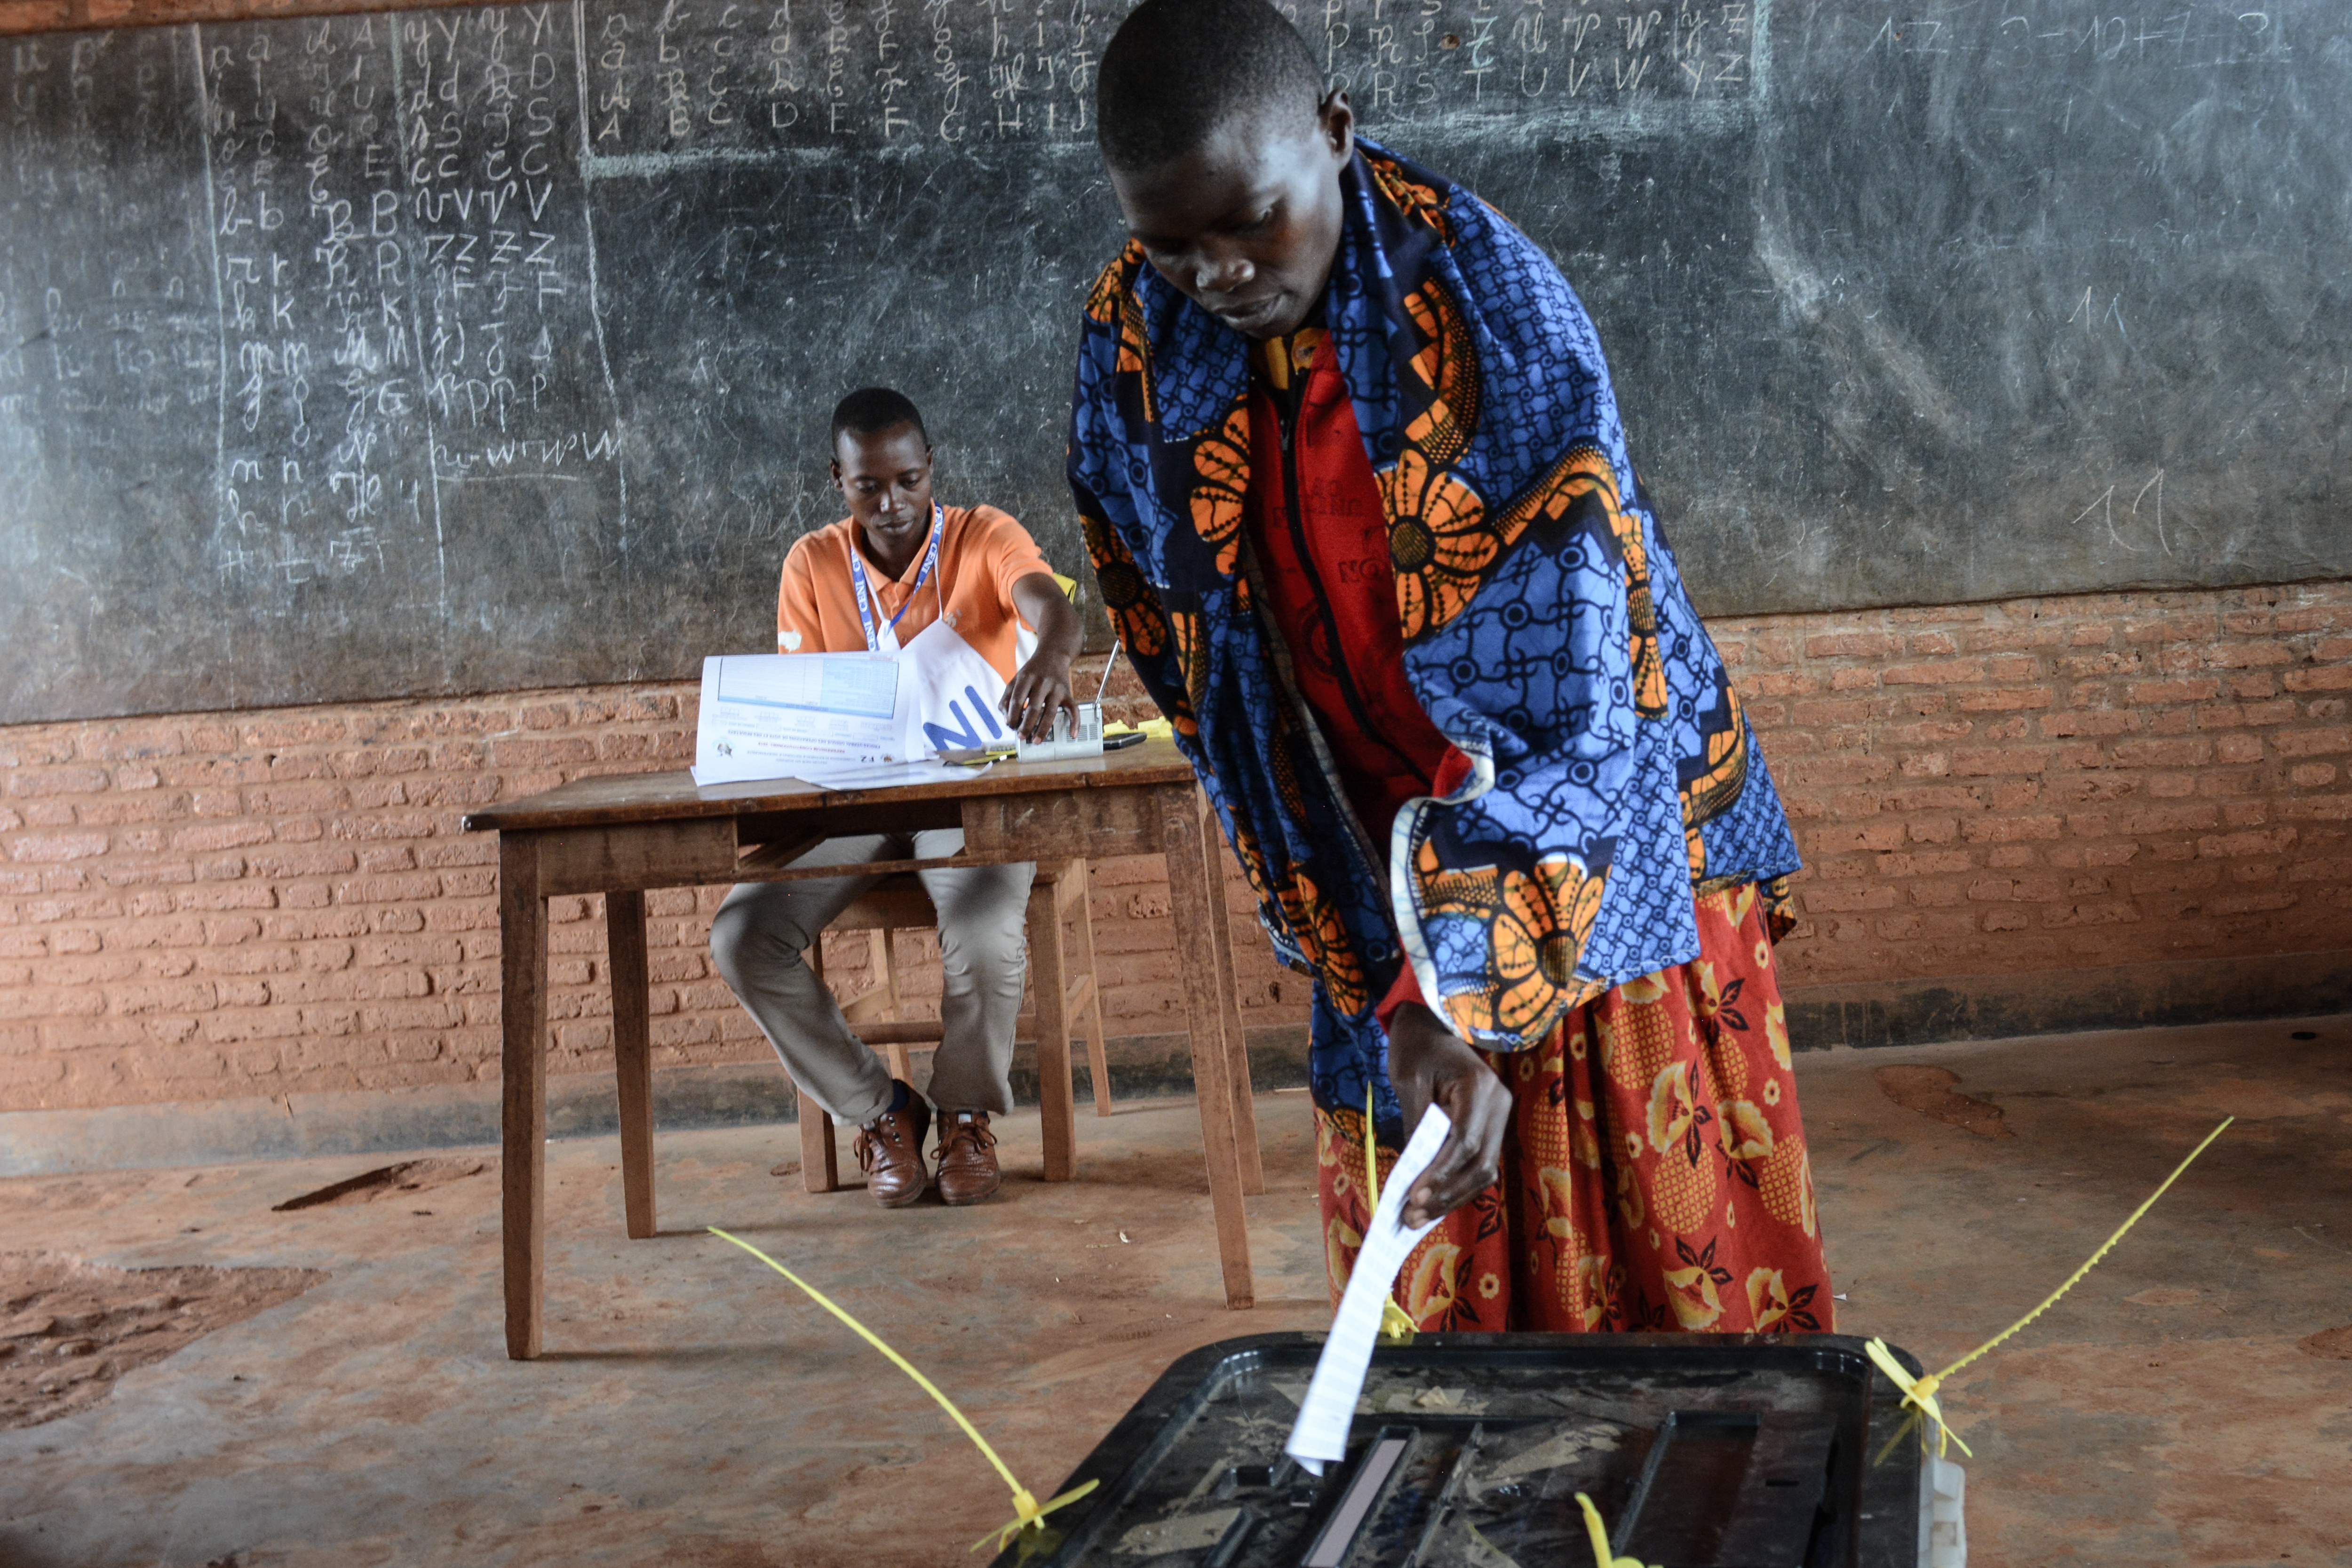 A woman casts her vote at a polling station in Ciri, Burundi, on May 17, 2018 during a referendum on constitutional reforms that, if passed, will shore up the power of the incumbent President and enable him to rule until 2034.  For many critics, the r